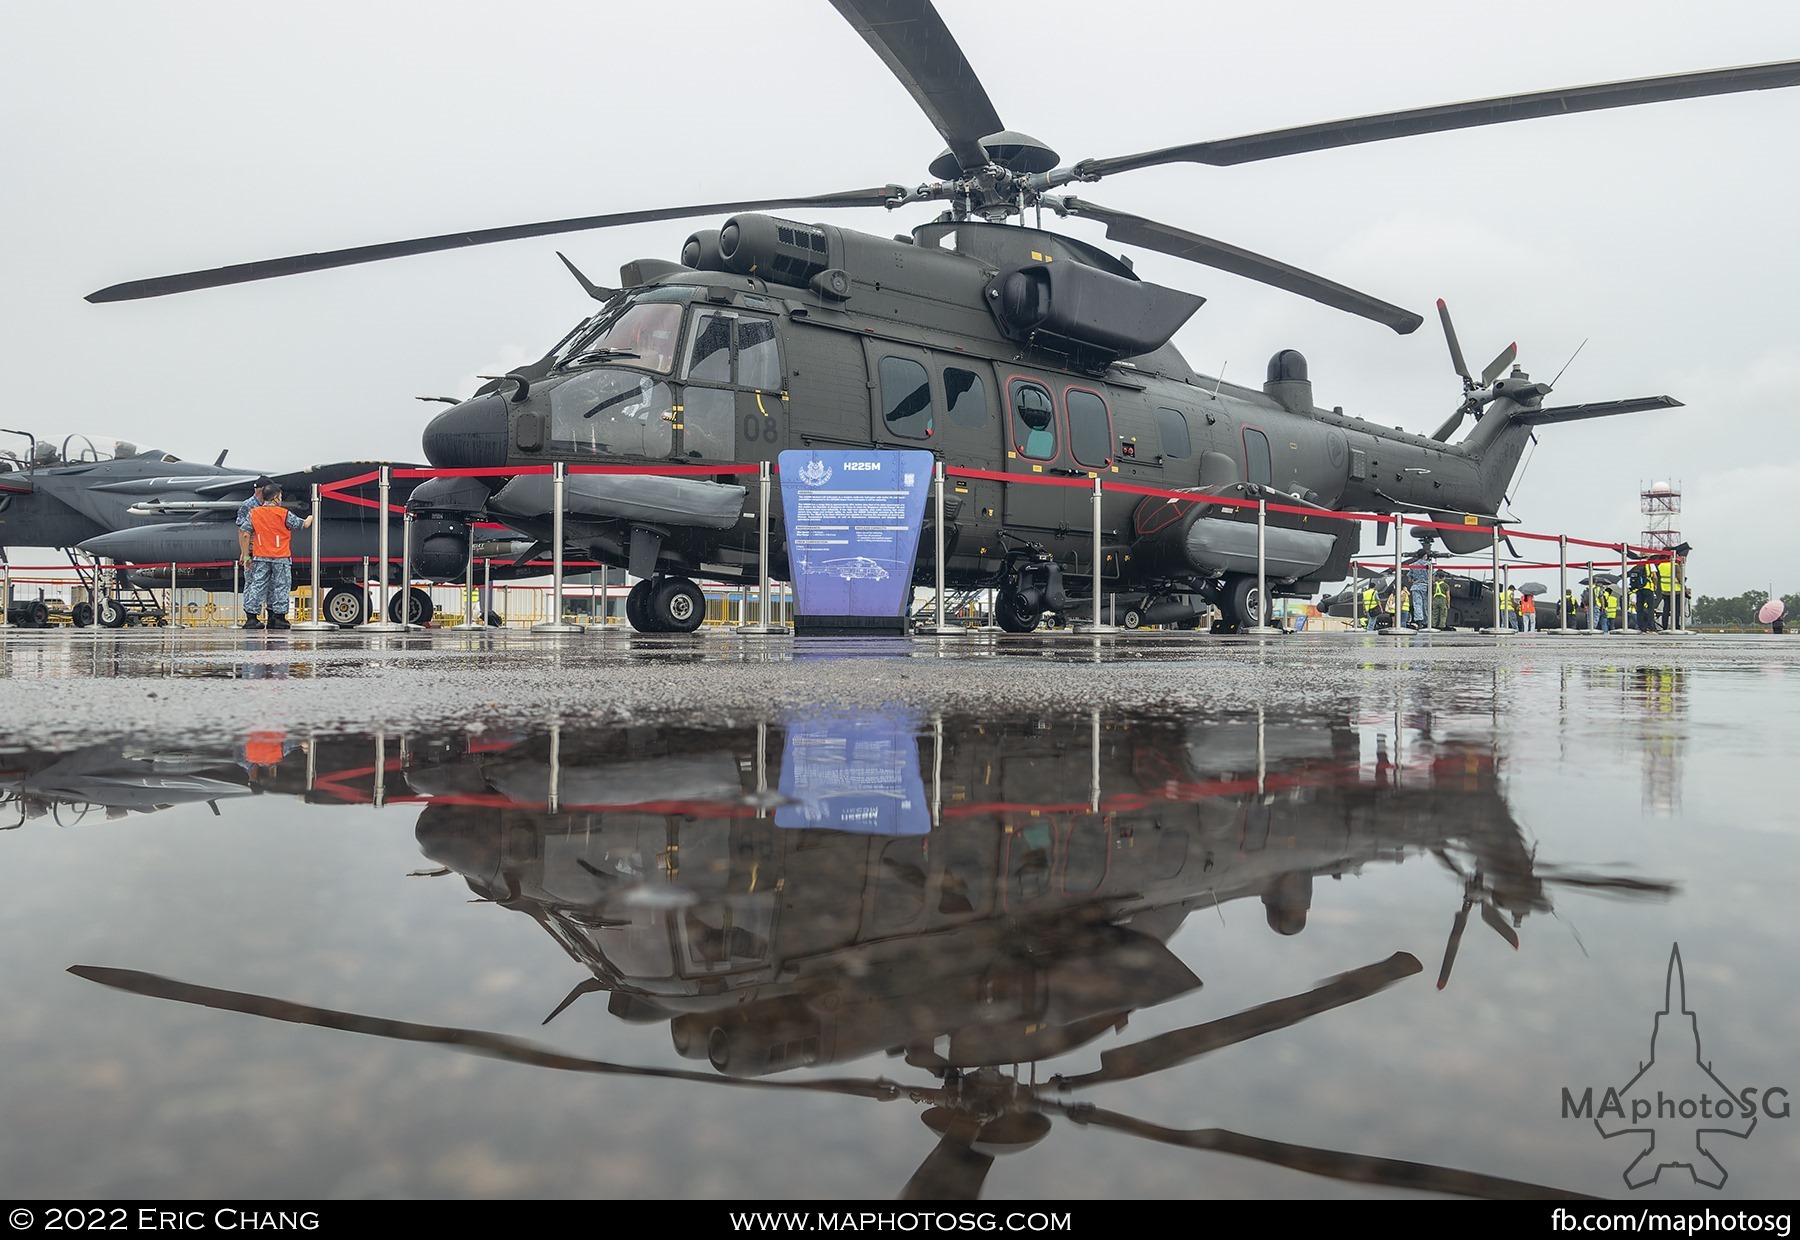 RSAF H225M medium lift helicopter with full suite of sensors